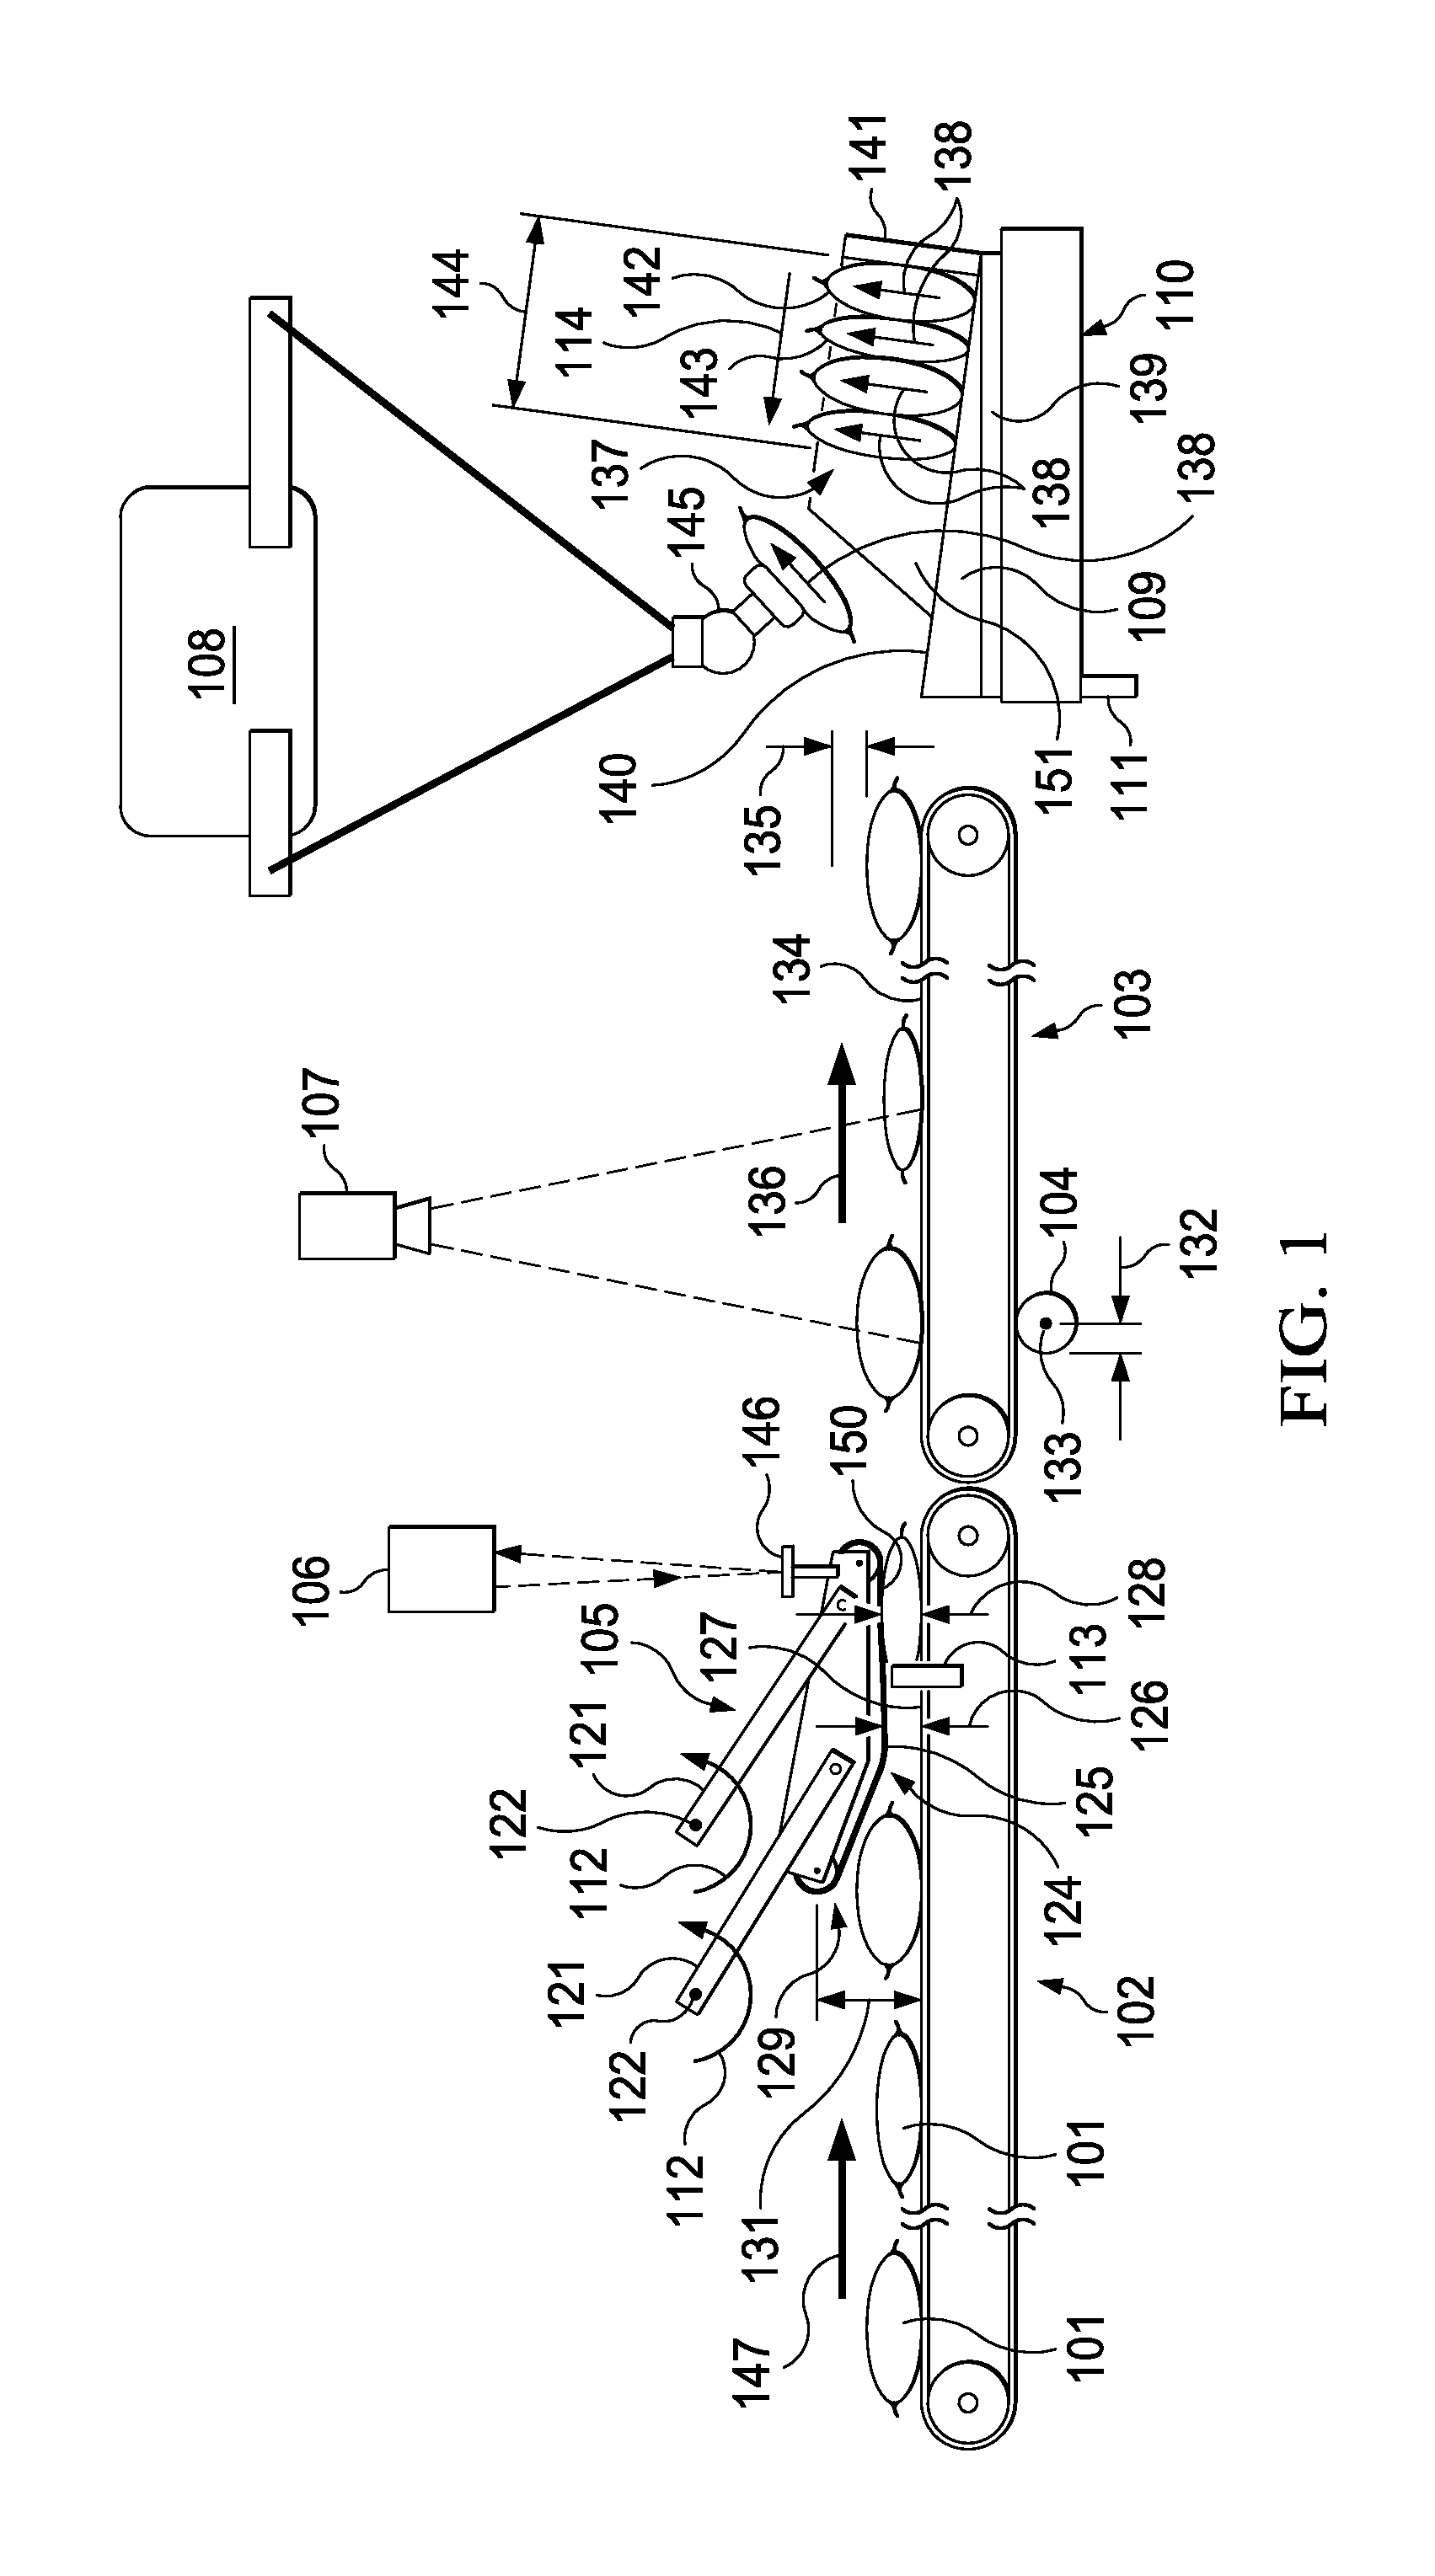 Apparatus and Method for Transferring a Pattern from a Universal Surface to an Ultimate Package